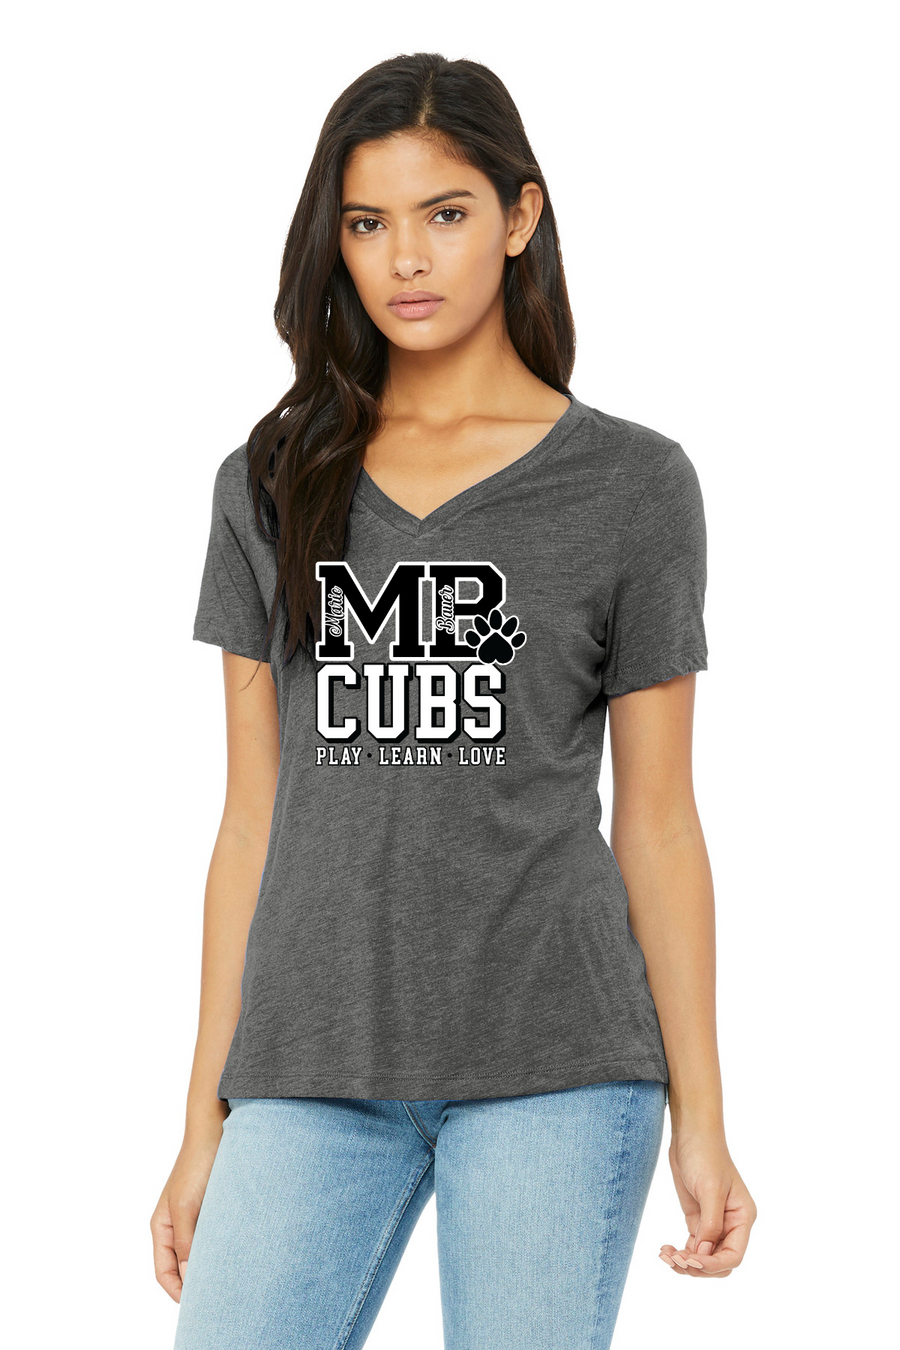 Marie Bauer Early Education Spirit Wear 23-24 On-Demand-BELLA CANVAS Womens Relaxed Triblend V-Neck Tee MB Cubs Logo